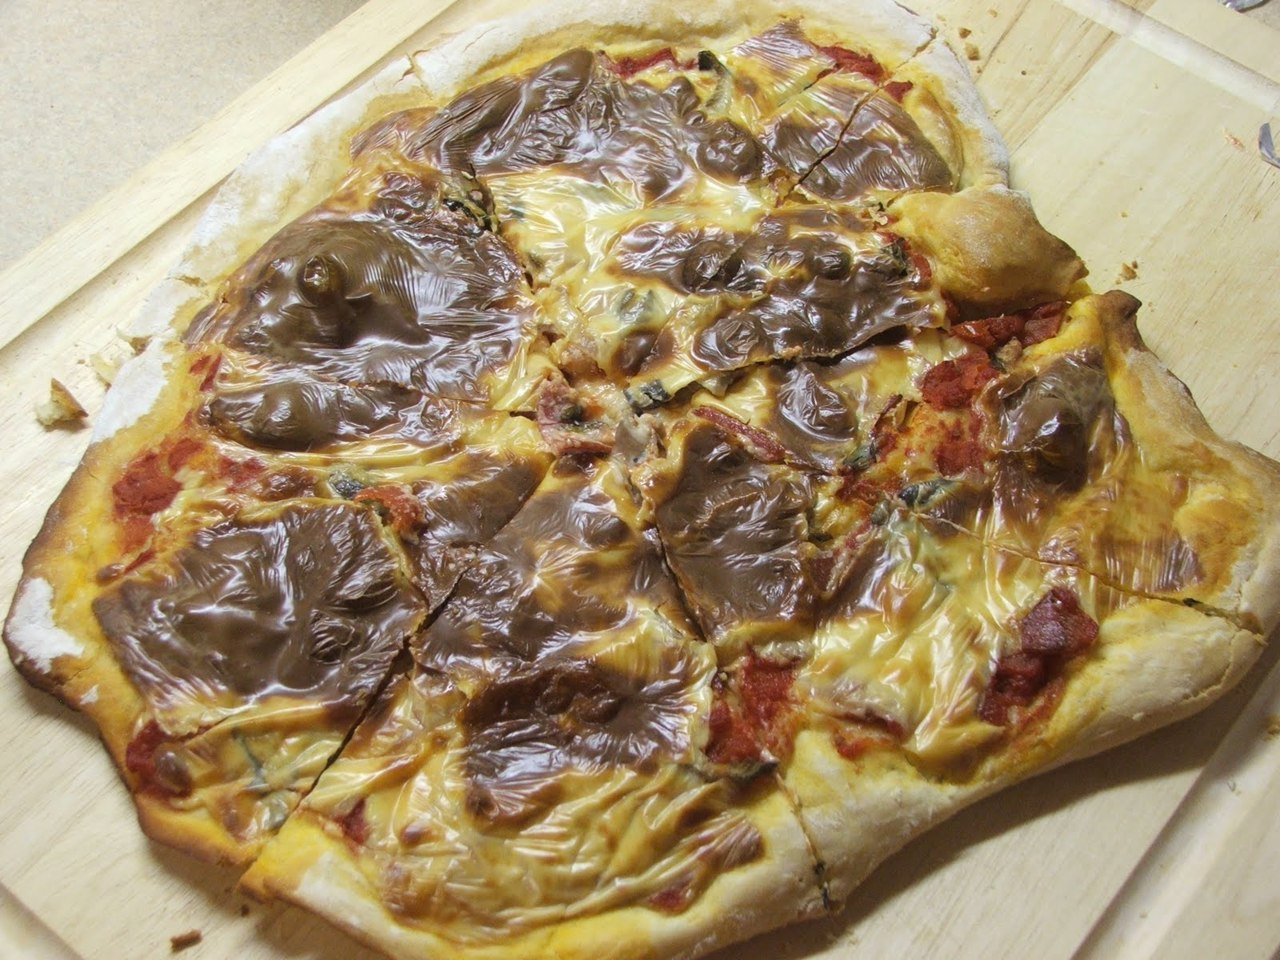 A pizza that is just... disgusting. I don't know how to put words to this one, other than it looks like it's topped with a sheet of plastic. It's vile.